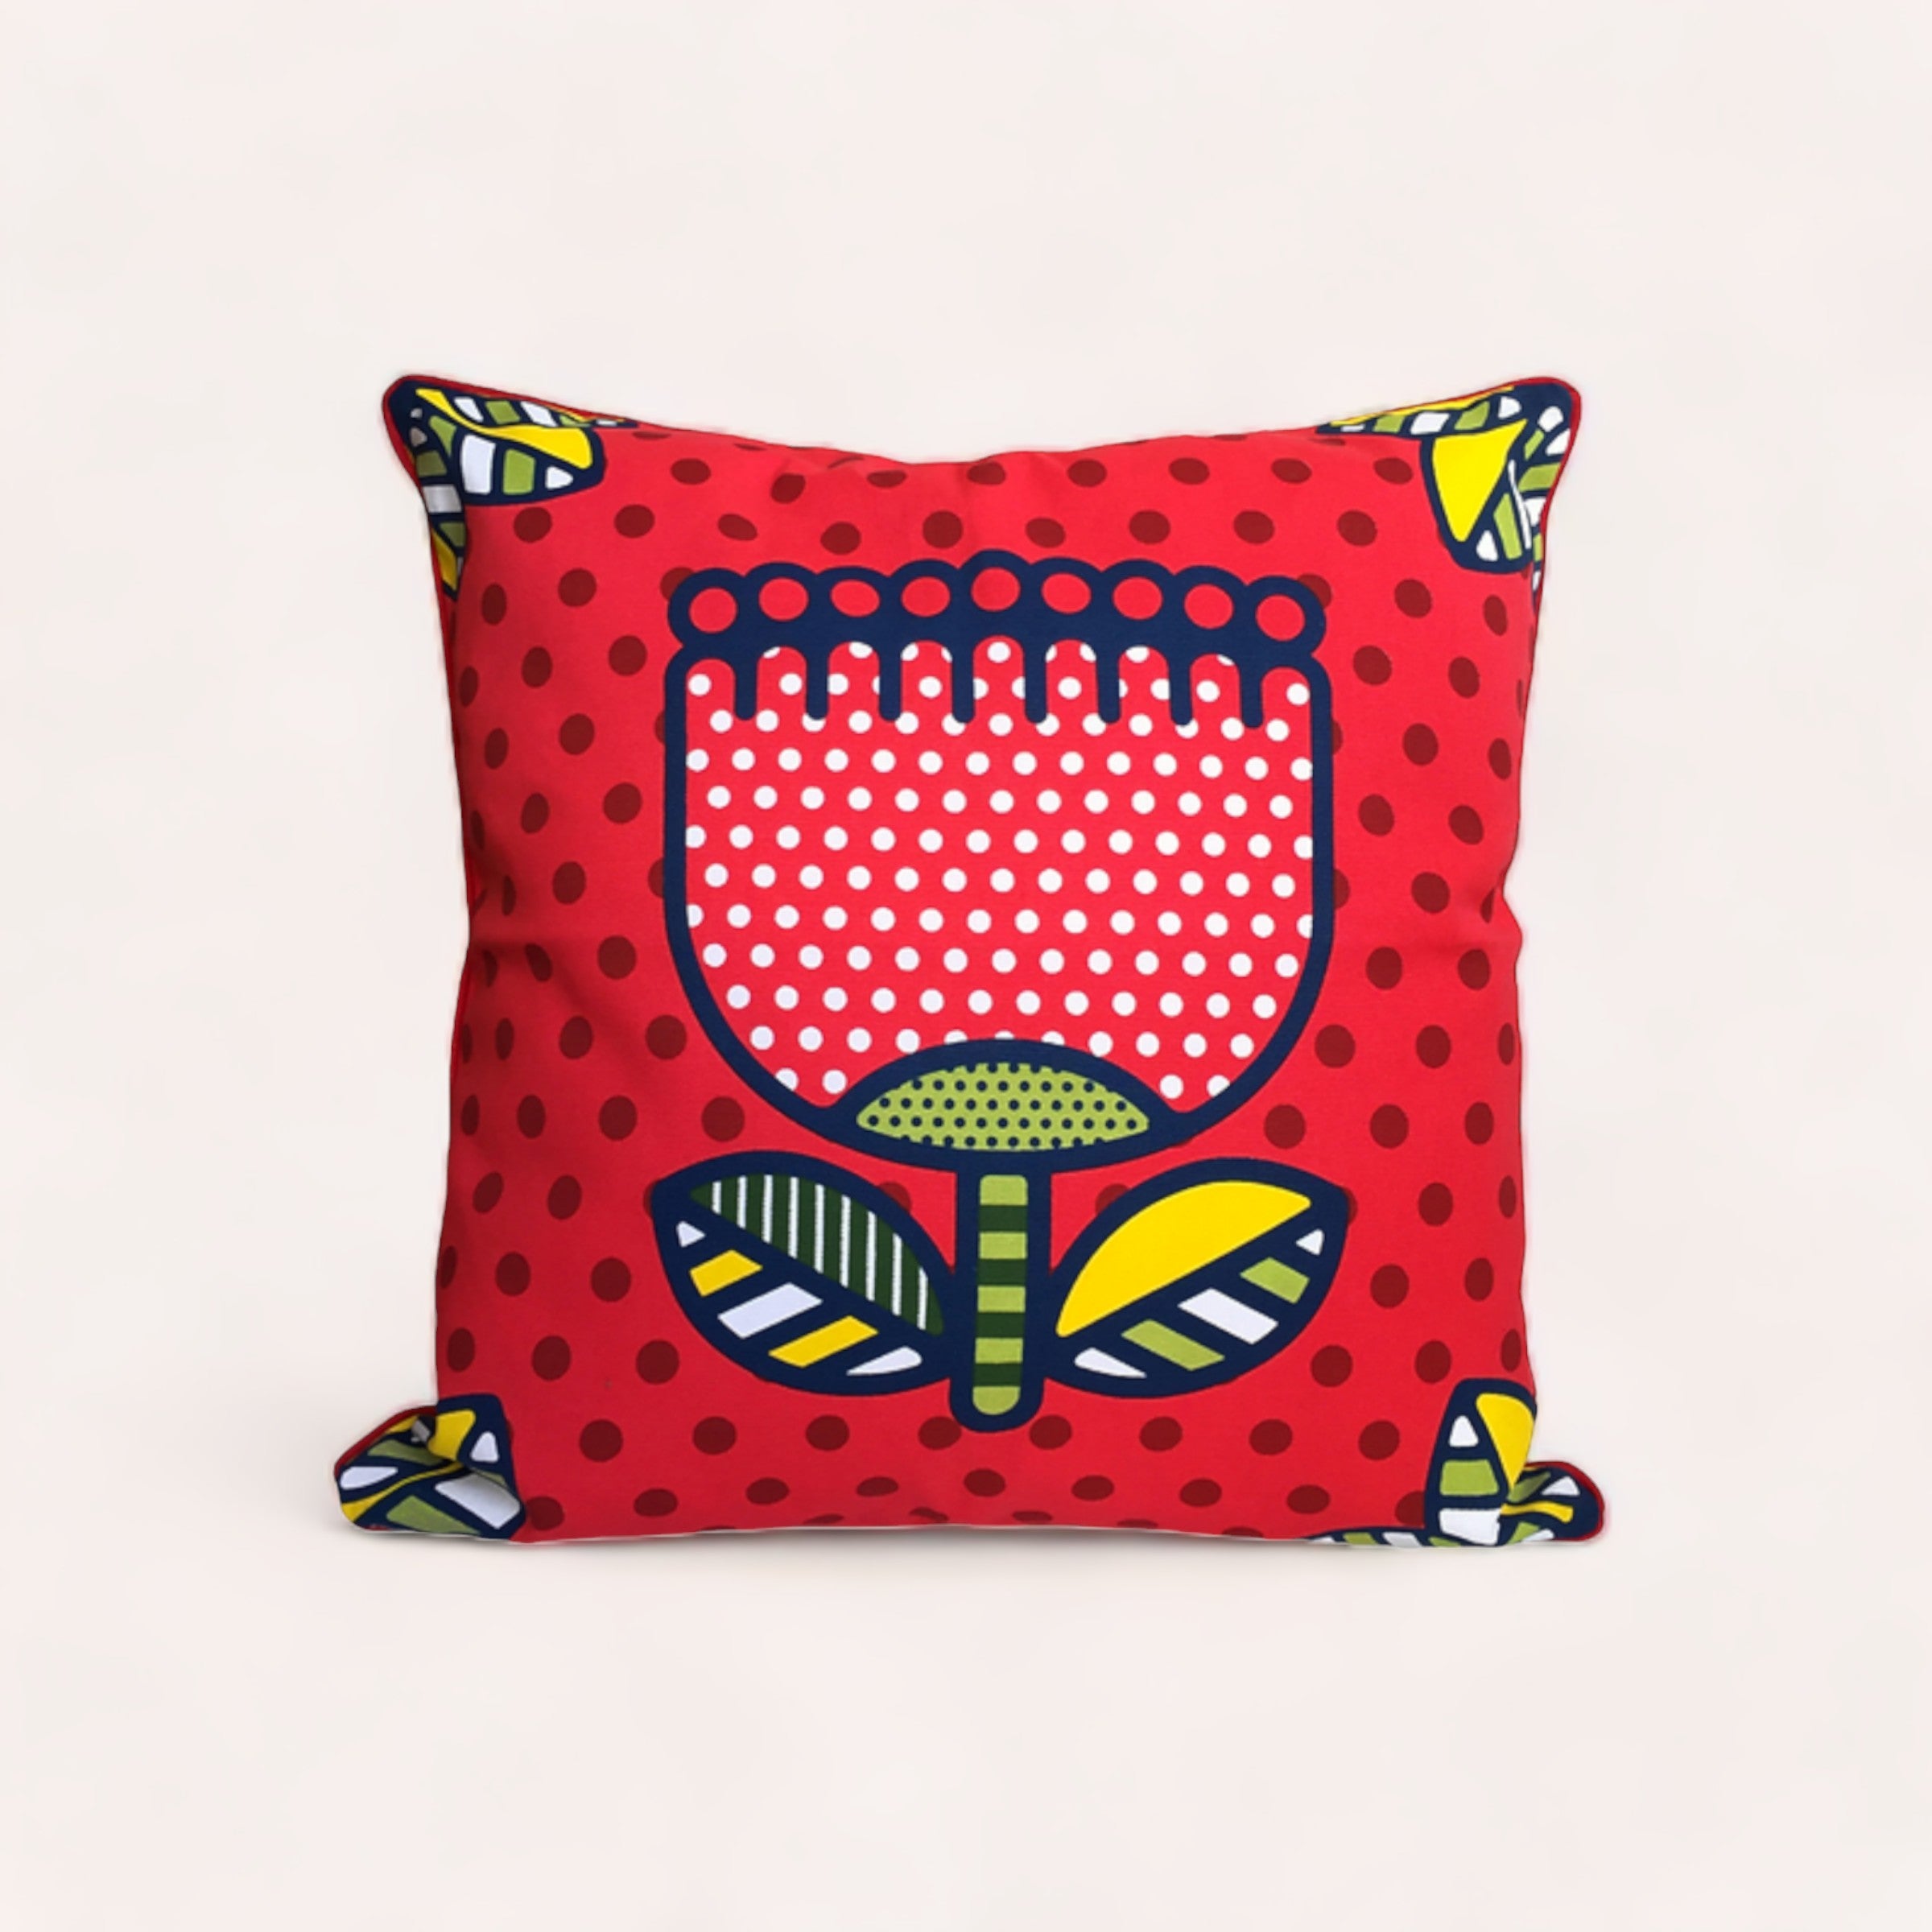 A vibrant red Pohutukawa Cushion Cover by Design by Leonard featuring a stylized illustration of a pohutukawa flower in a pop-art design, set against a dotted background, with playful tassel accents on the corners.